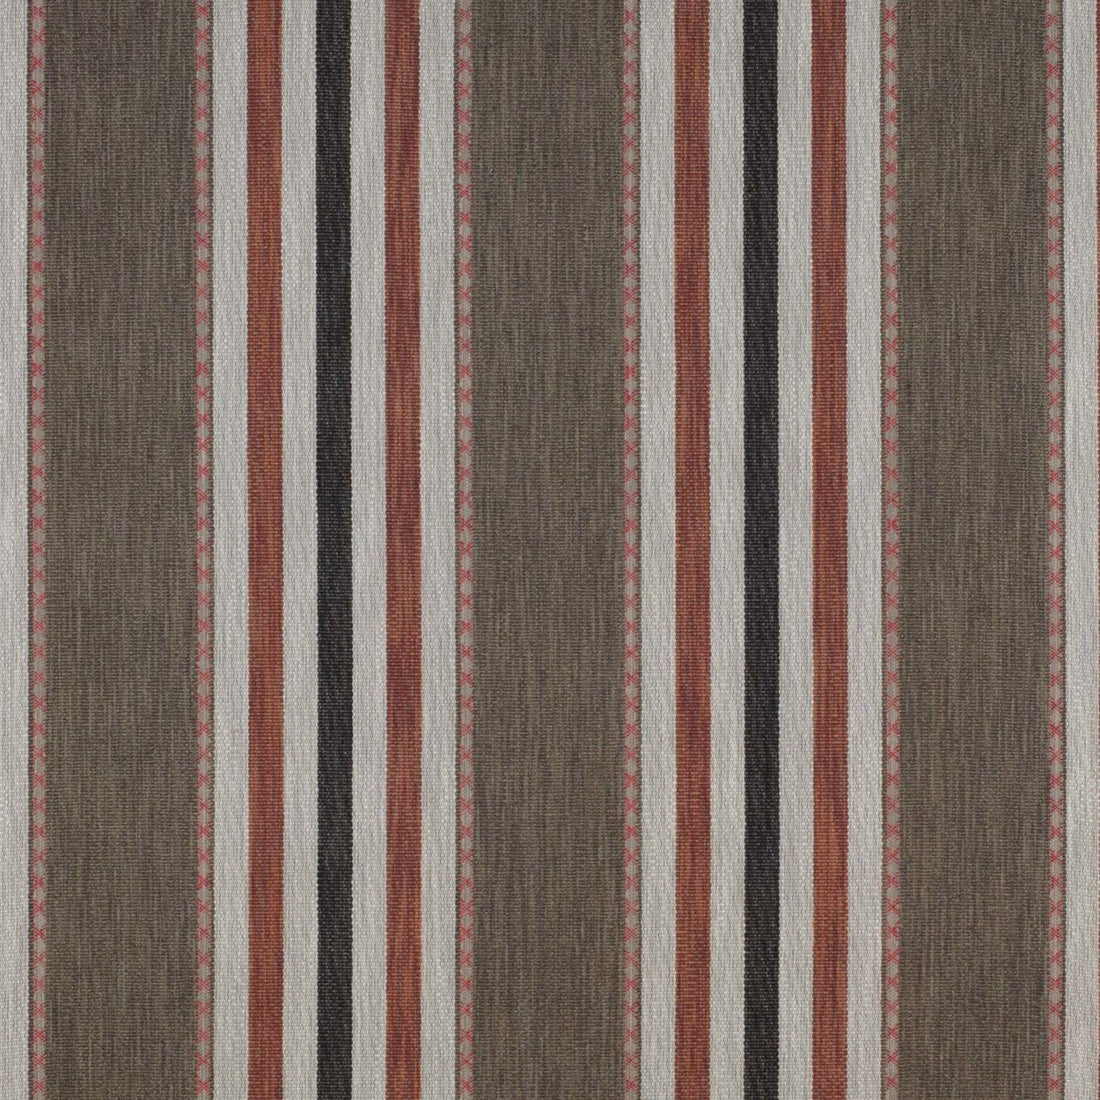 Albuquerque fabric in tabaco color - pattern GDT5151.005.0 - by Gaston y Daniela in the Gaston Uptown collection